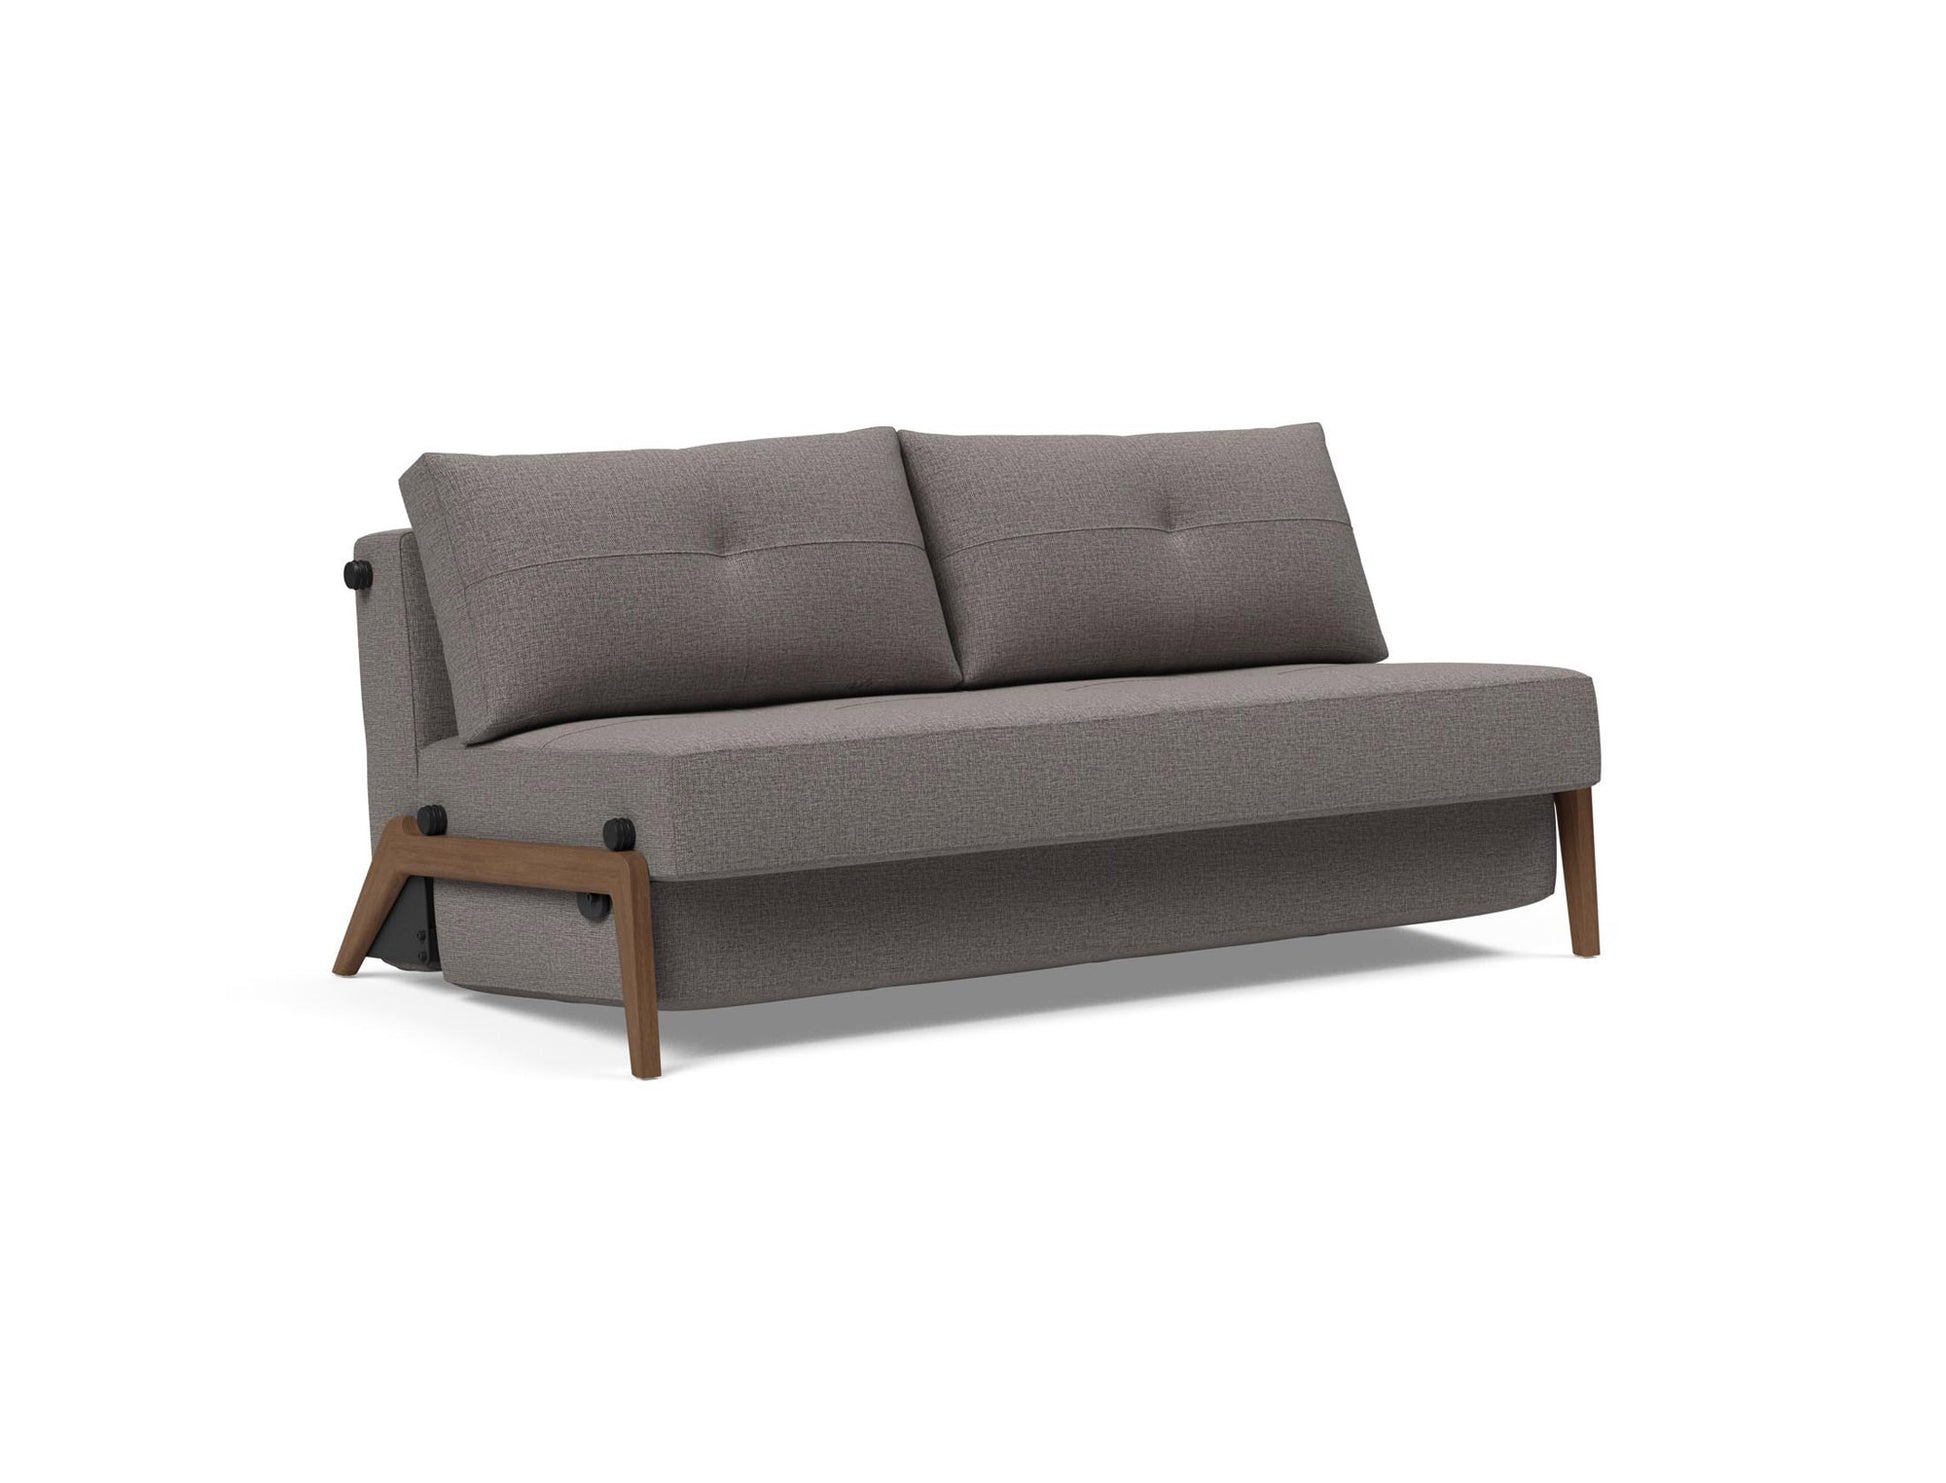 Innovation Living Cubed Queen Sofa Bed With Dark Wood Legs